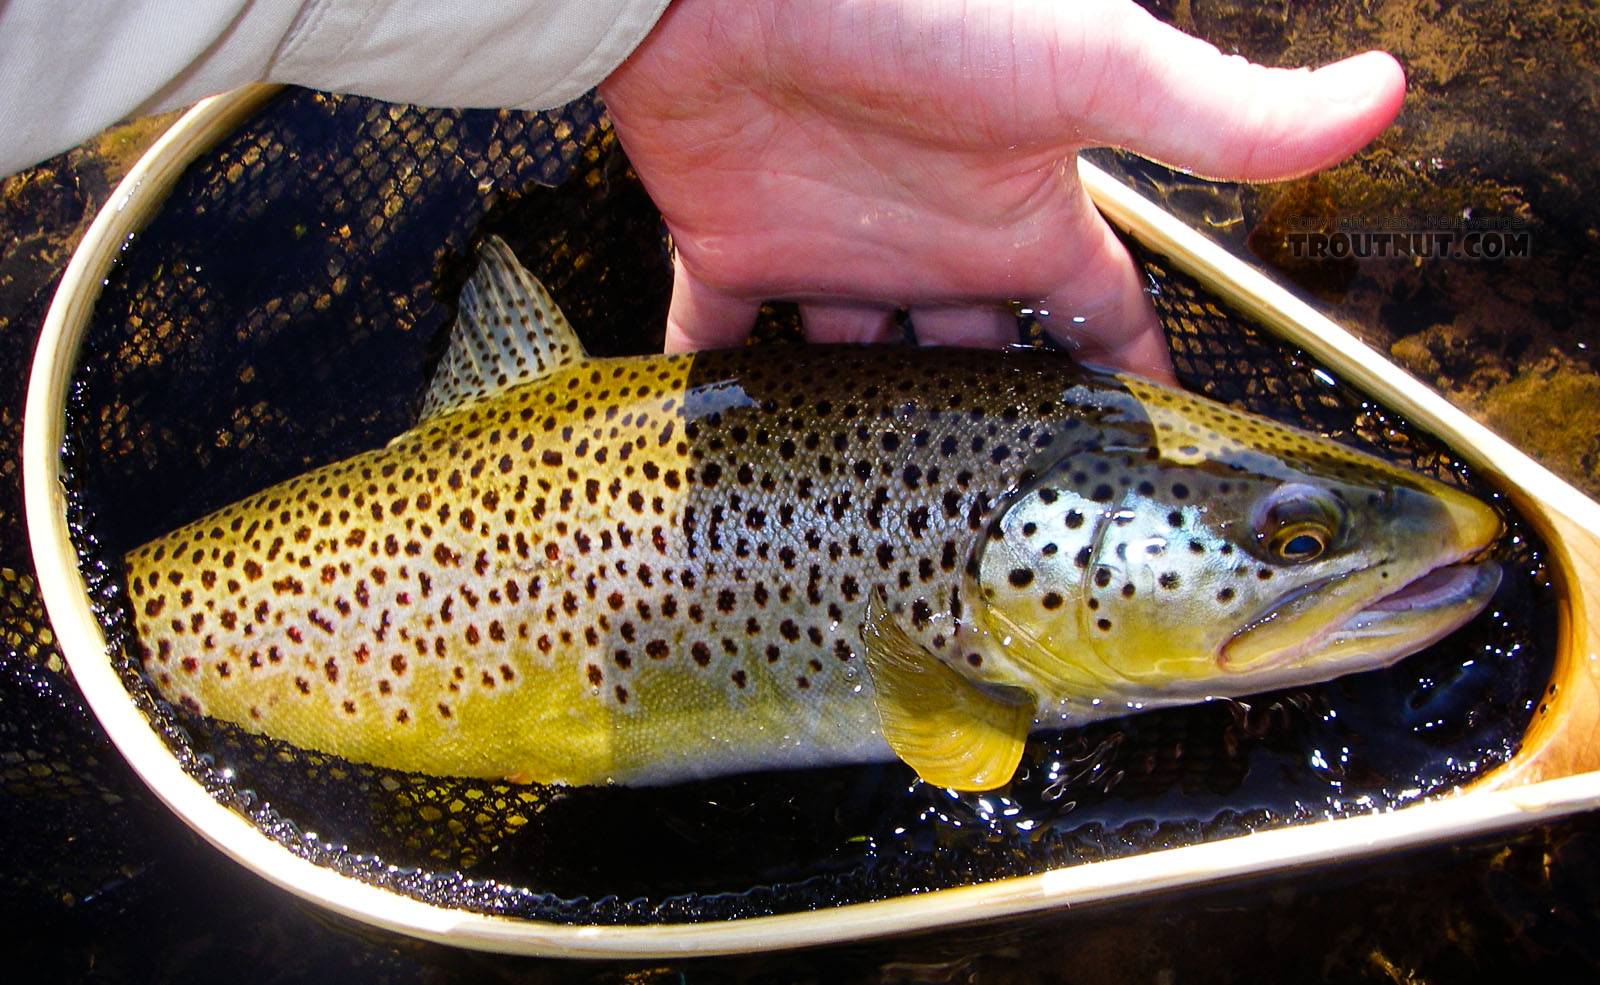 An 18-inch Catskill brown trout. From the West Branch of the Delaware River in New York.